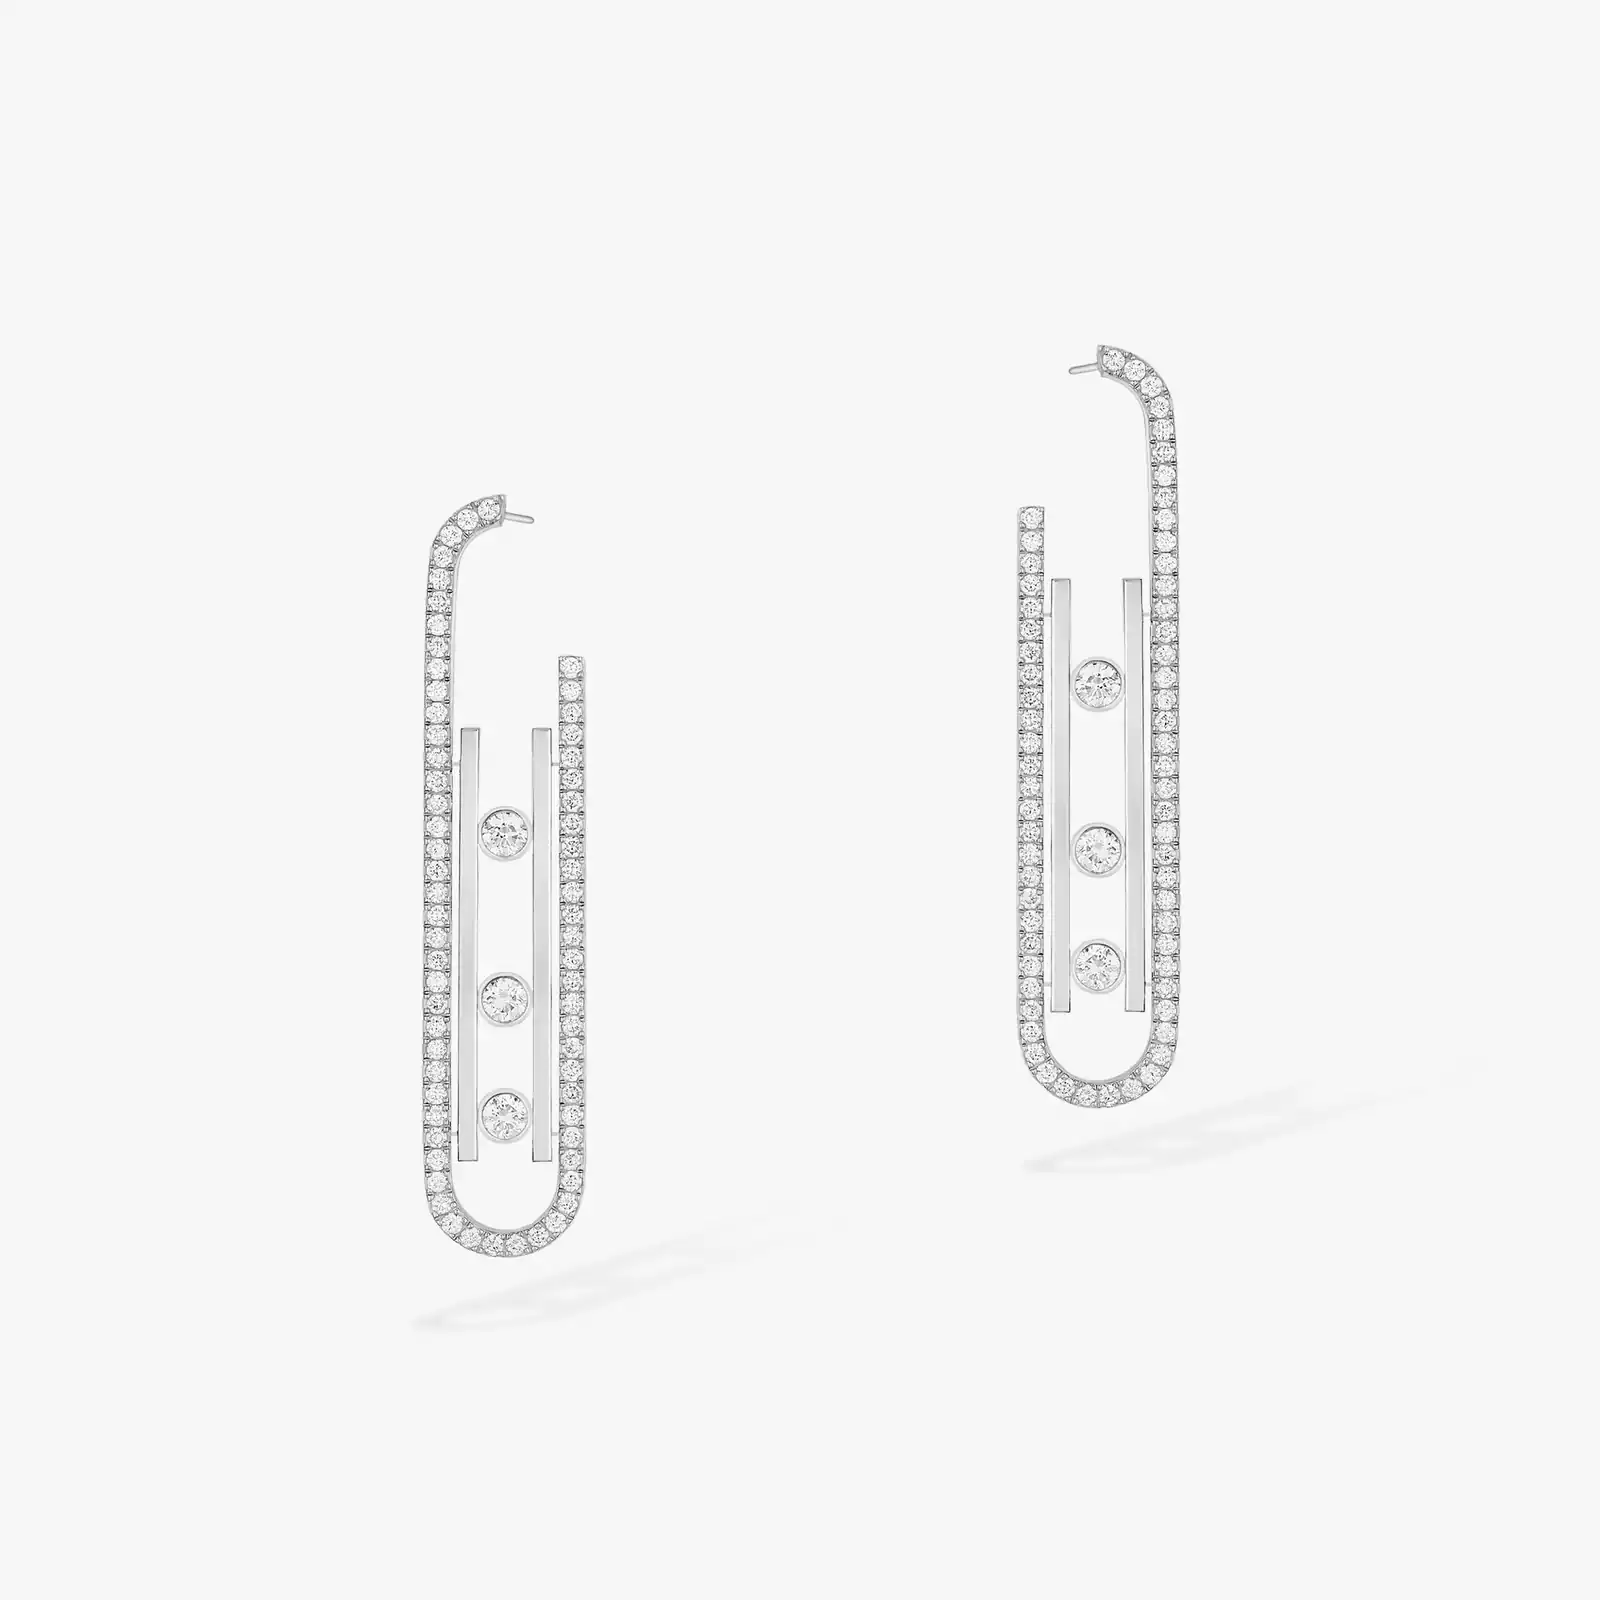 Boucles d'oreilles Move 10th SM White Gold For Her Diamond Earrings 10811-WG